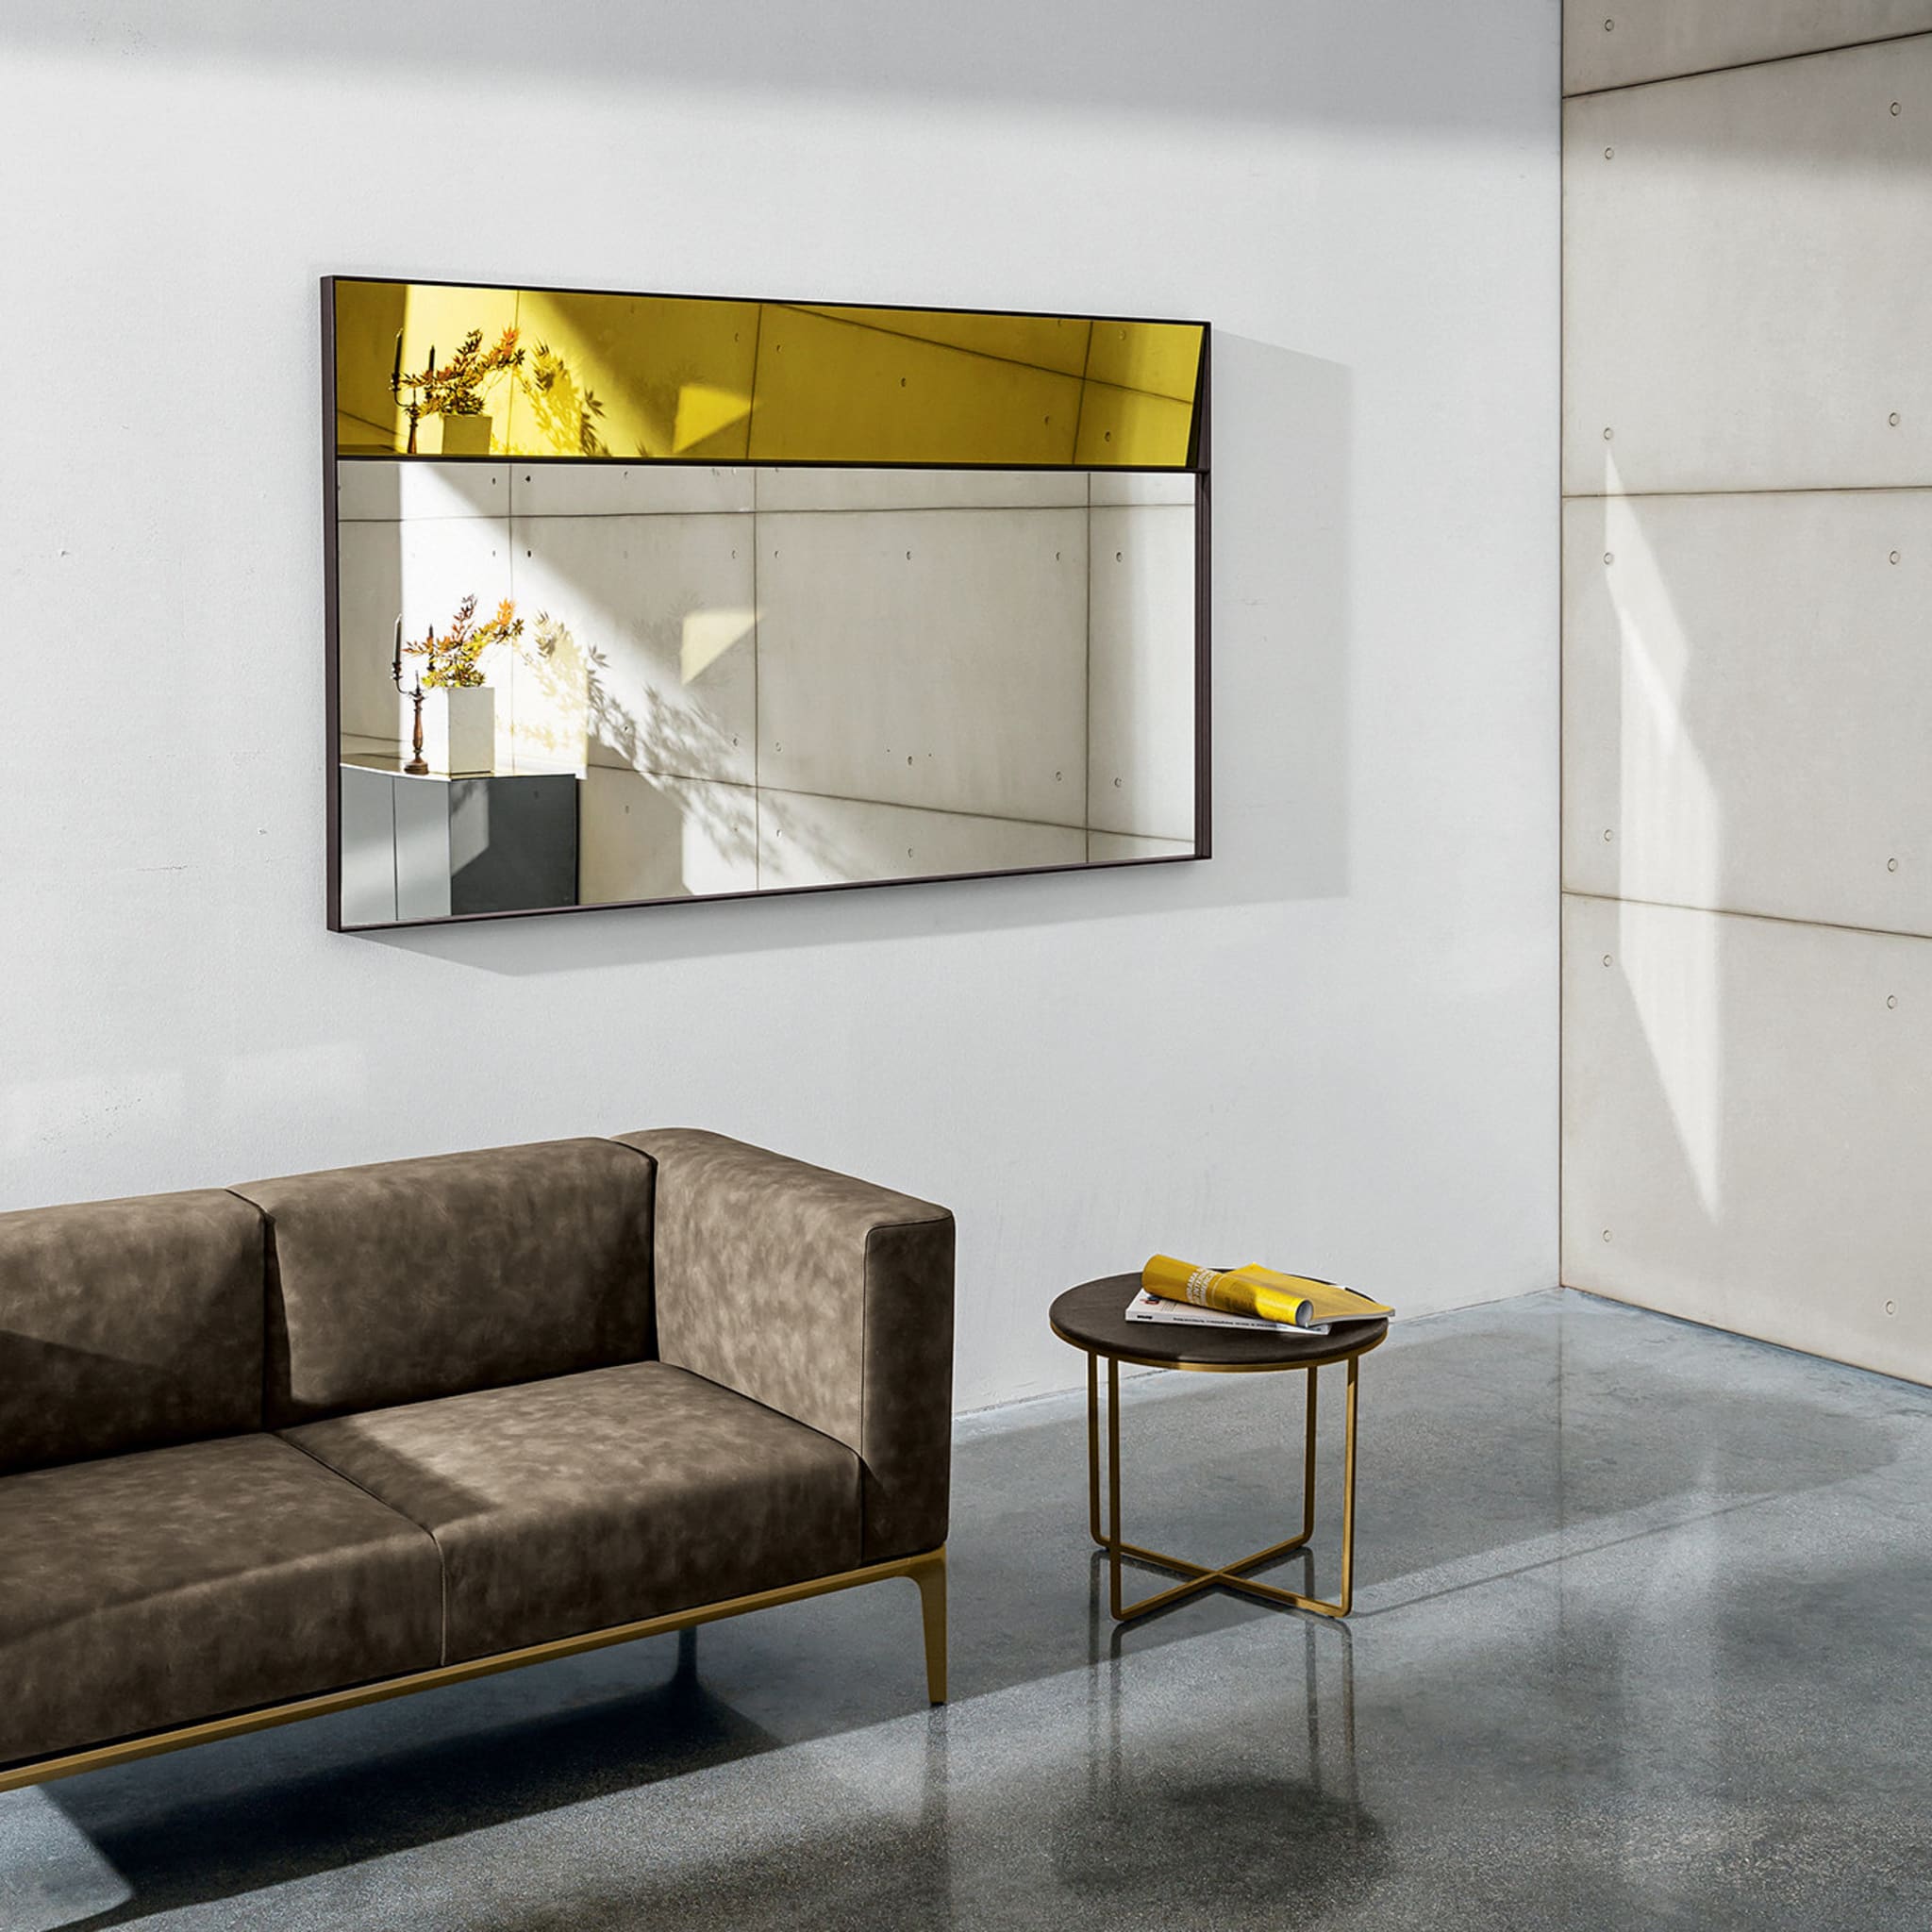 Campos Horizontal Mirror in Extralight and Gold  - Alternative view 1